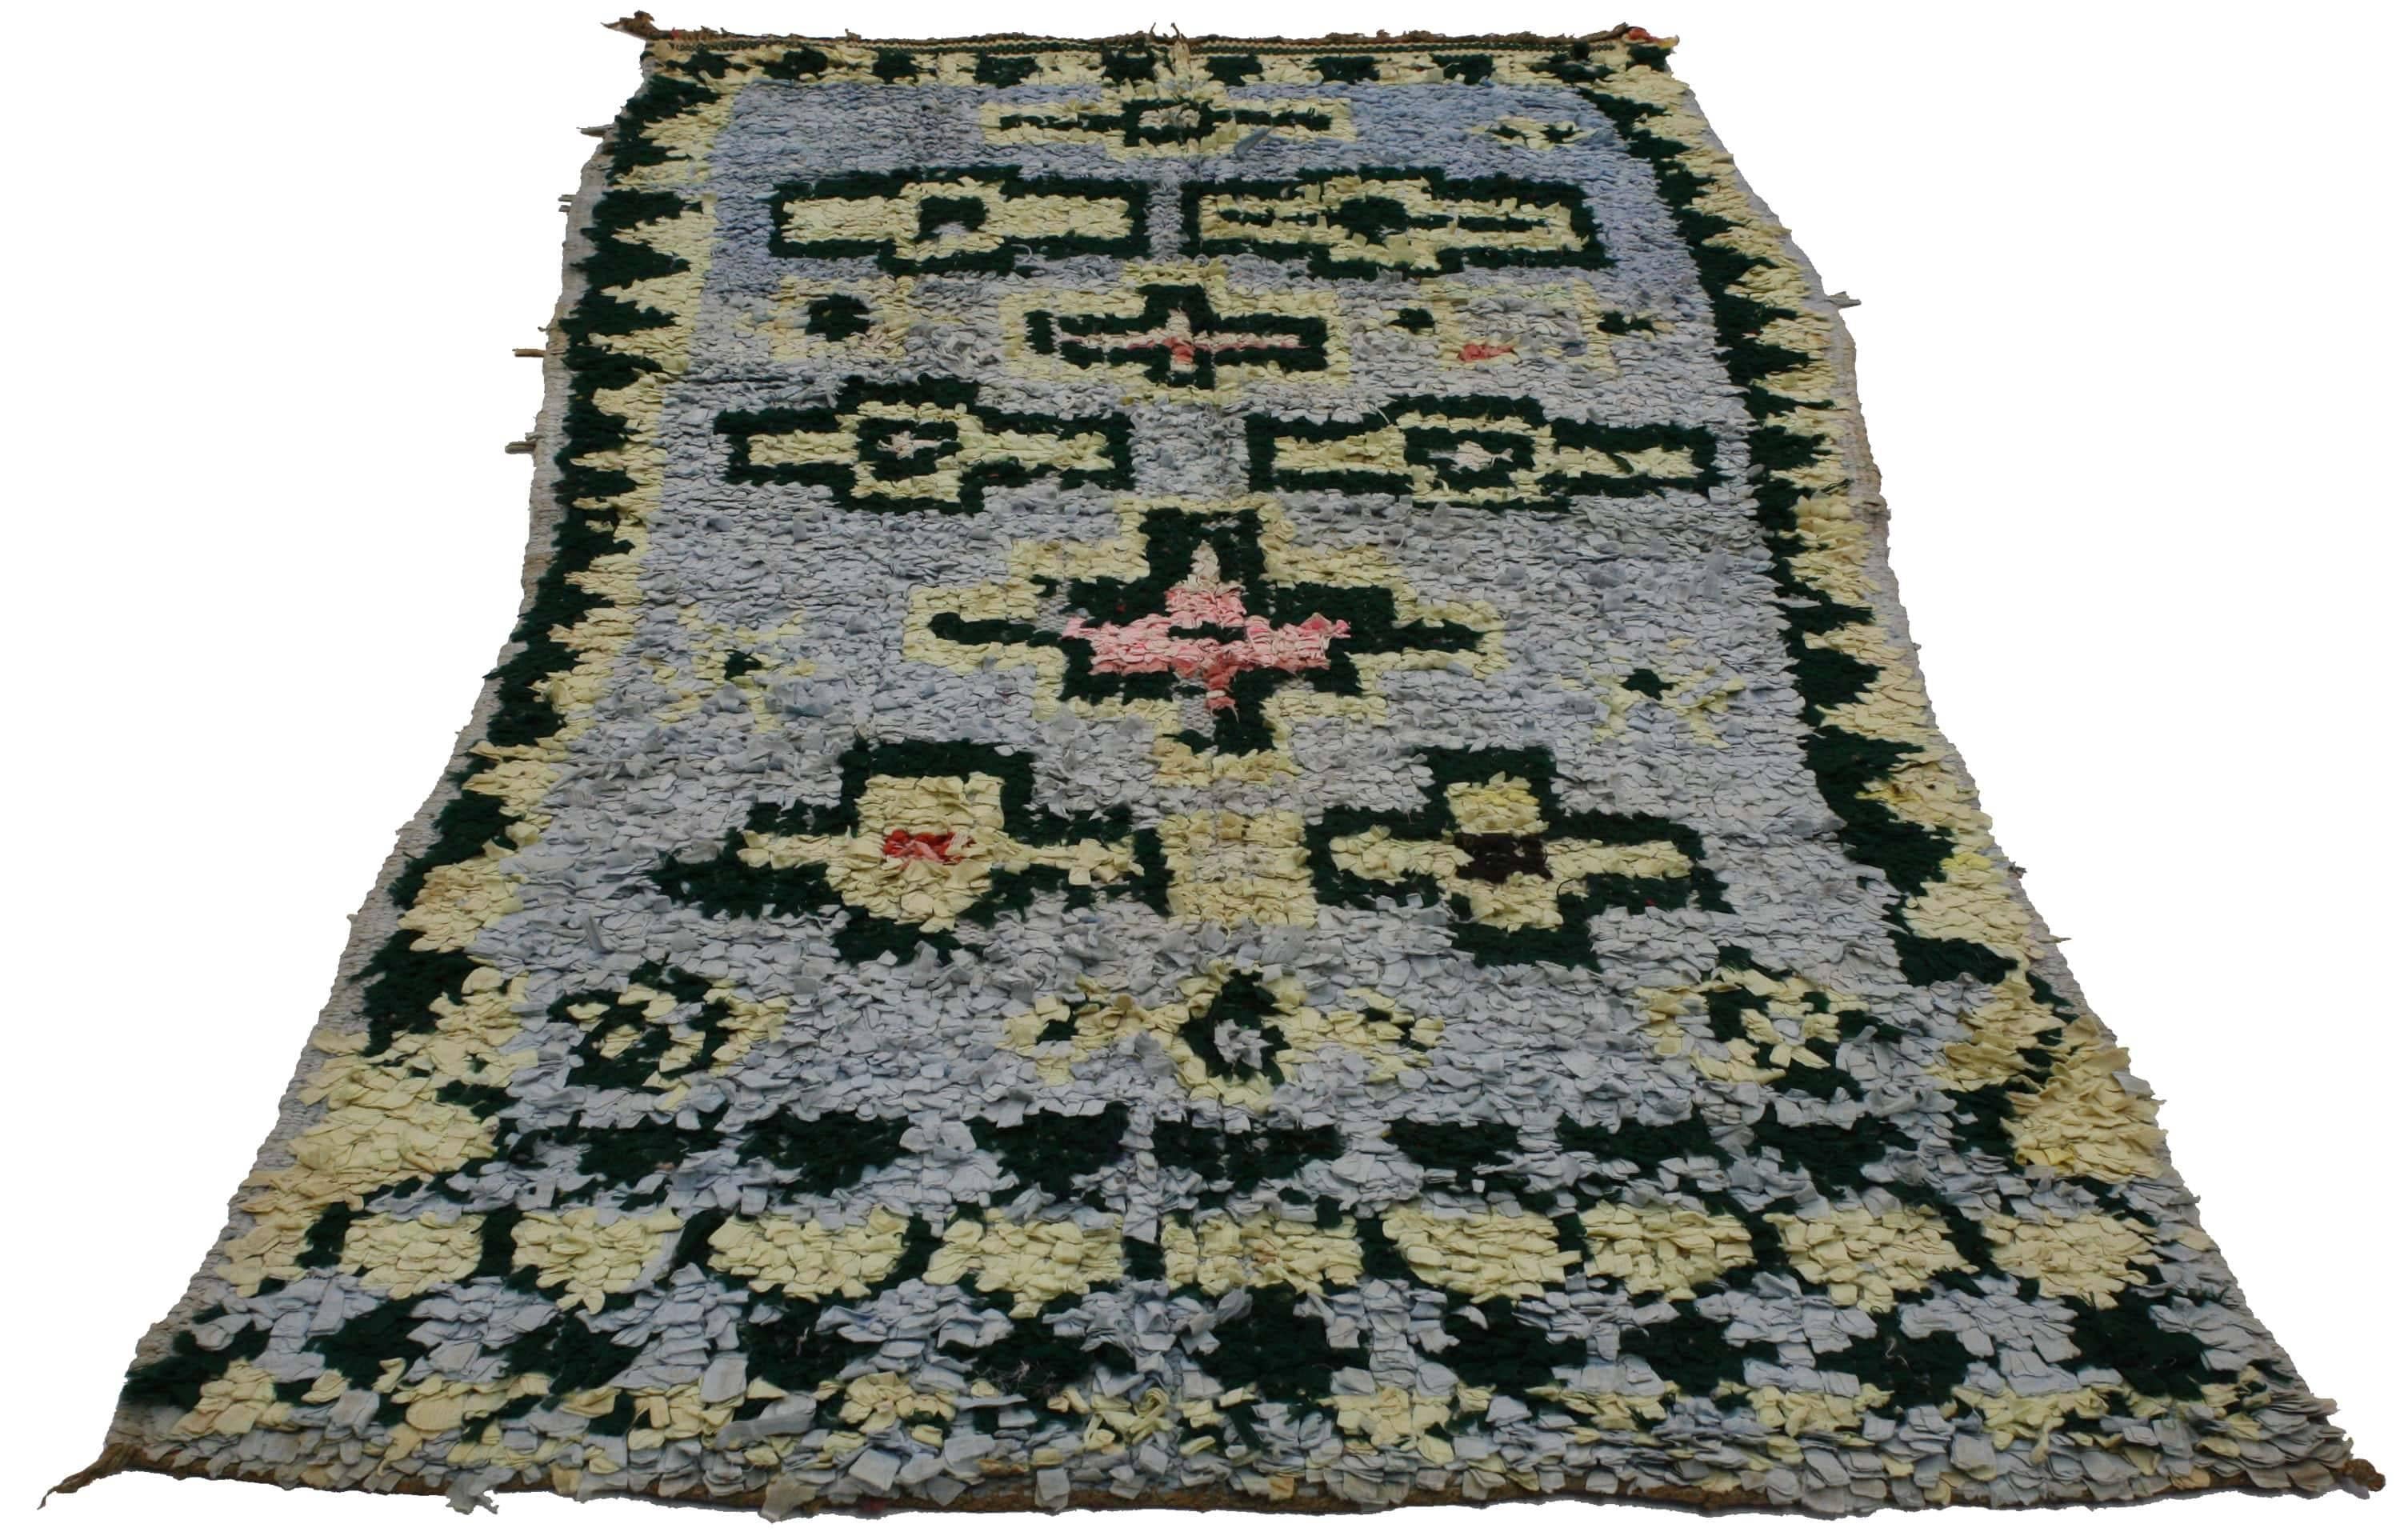 20318 vintage Berber Moroccan Boucherouite rug. The subtlety of a light blue background allows the bold colors used to ornament the rug to stand out. The rug is primarily ornamented by large cruciform shapes, Solomon Star fertility motifs, a flurry